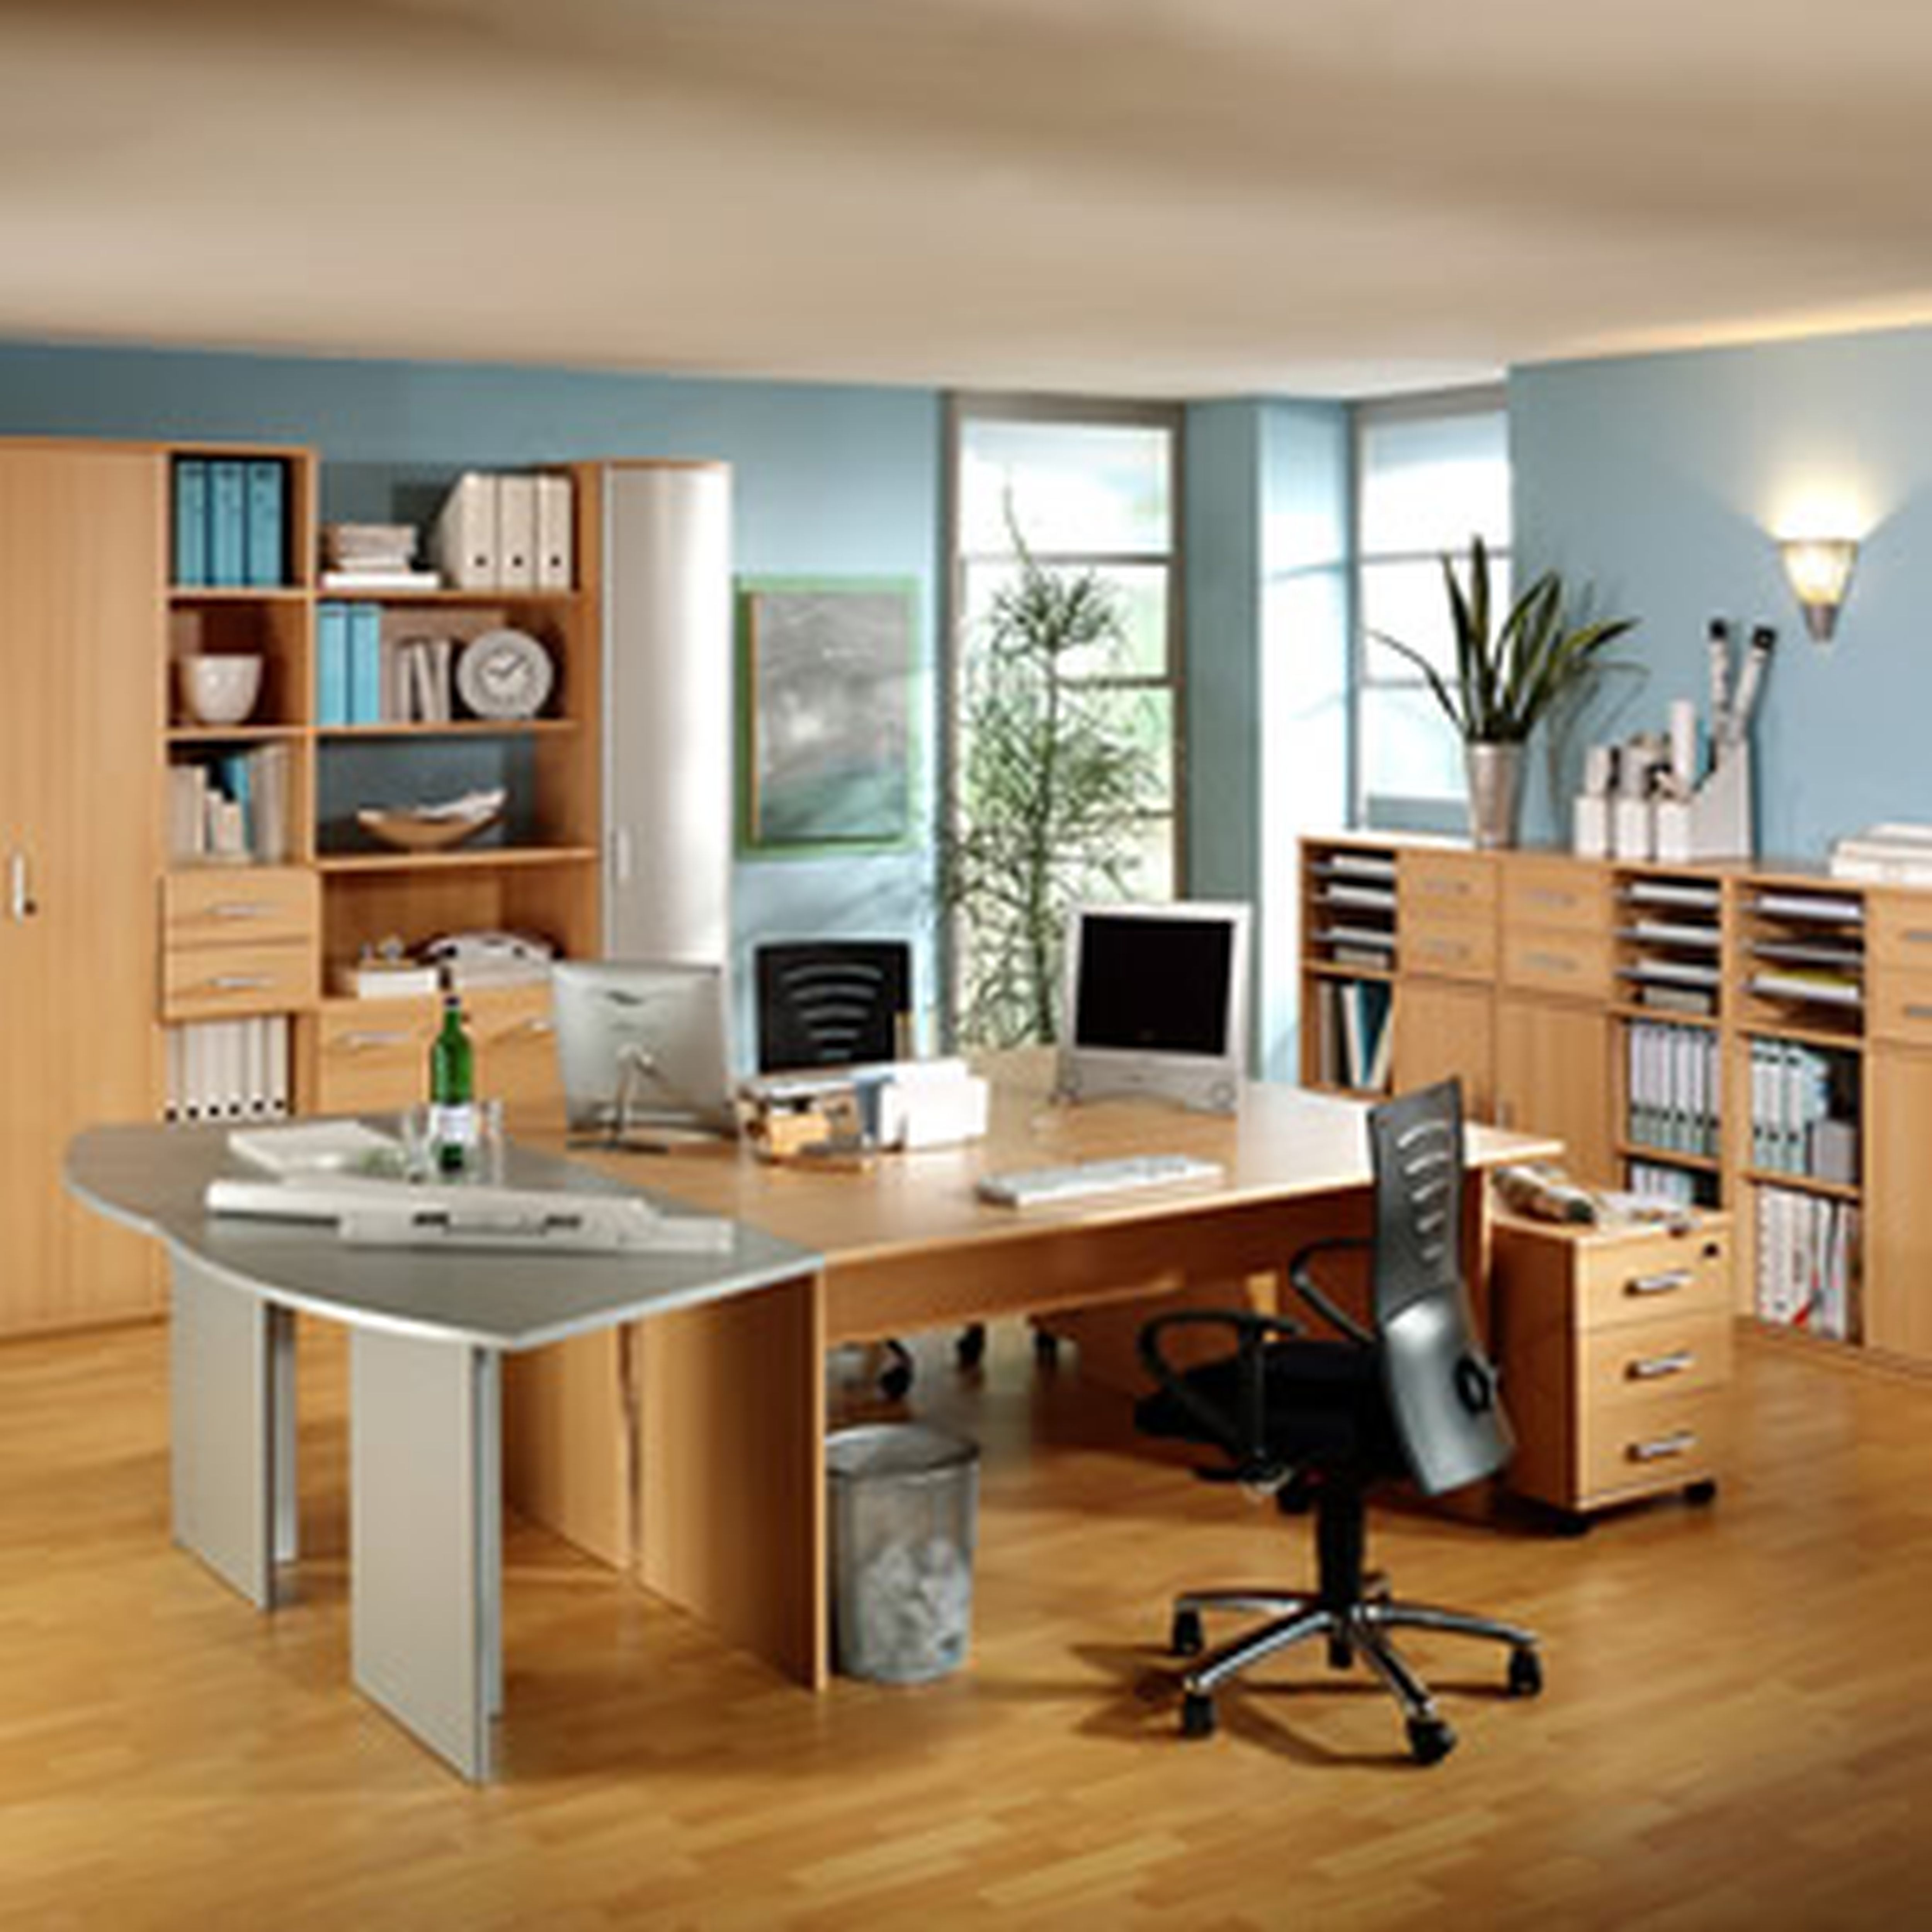 Office Office Room Stylish On For Amazing Of Trendy Home Design Agreeable Ideas 1835 20 Office Room